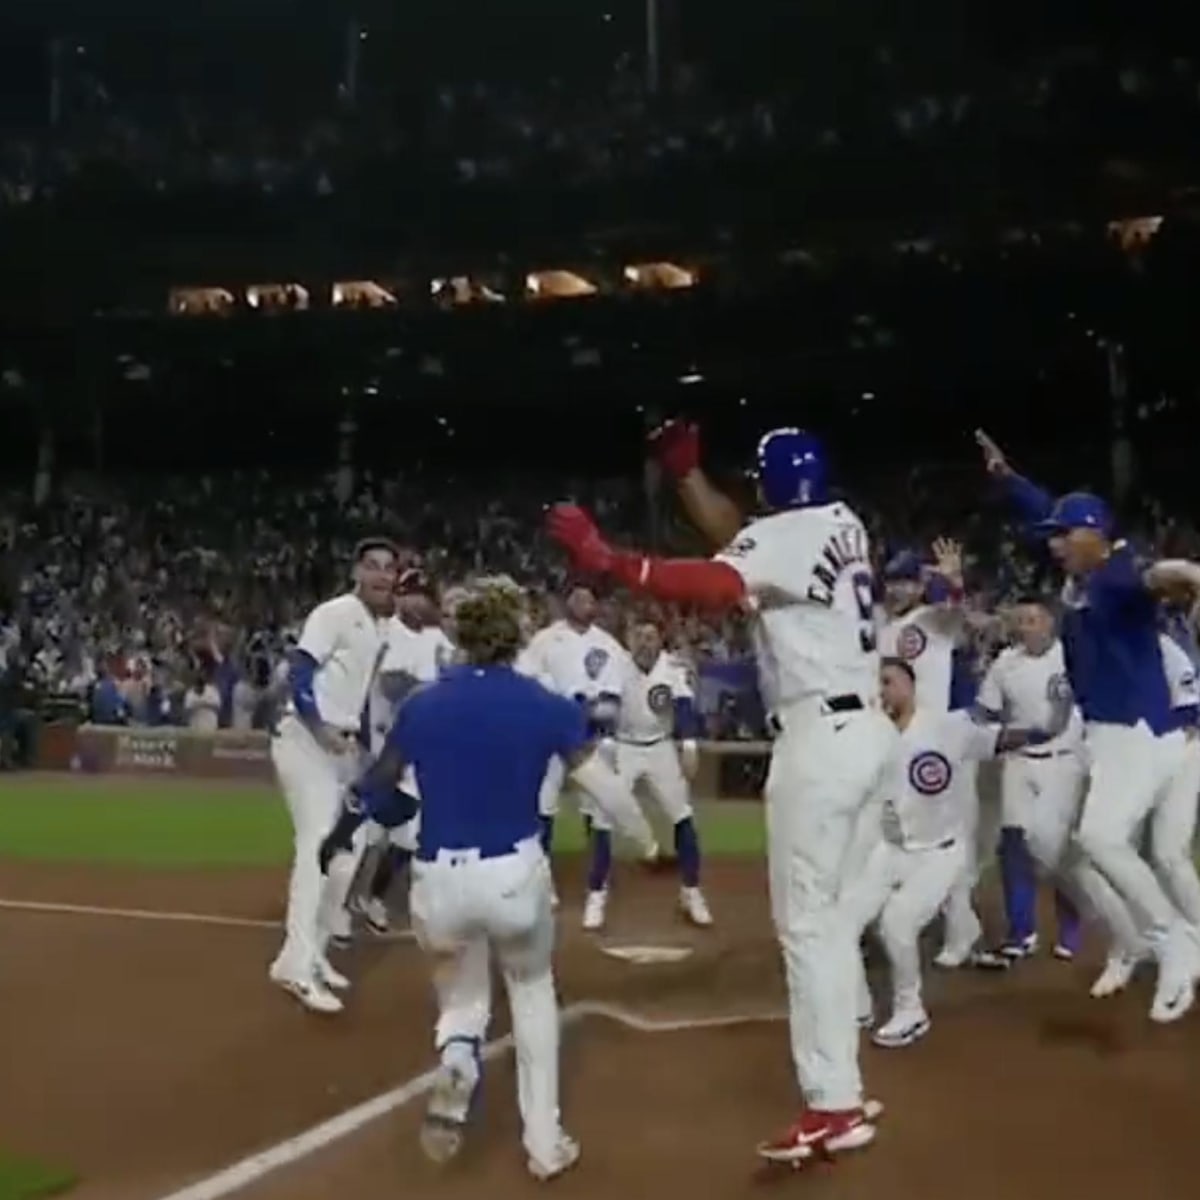 Cubs' Christopher Morel Had Celebration of MLB Season After His Walk-Off  Home Run - Sports Illustrated